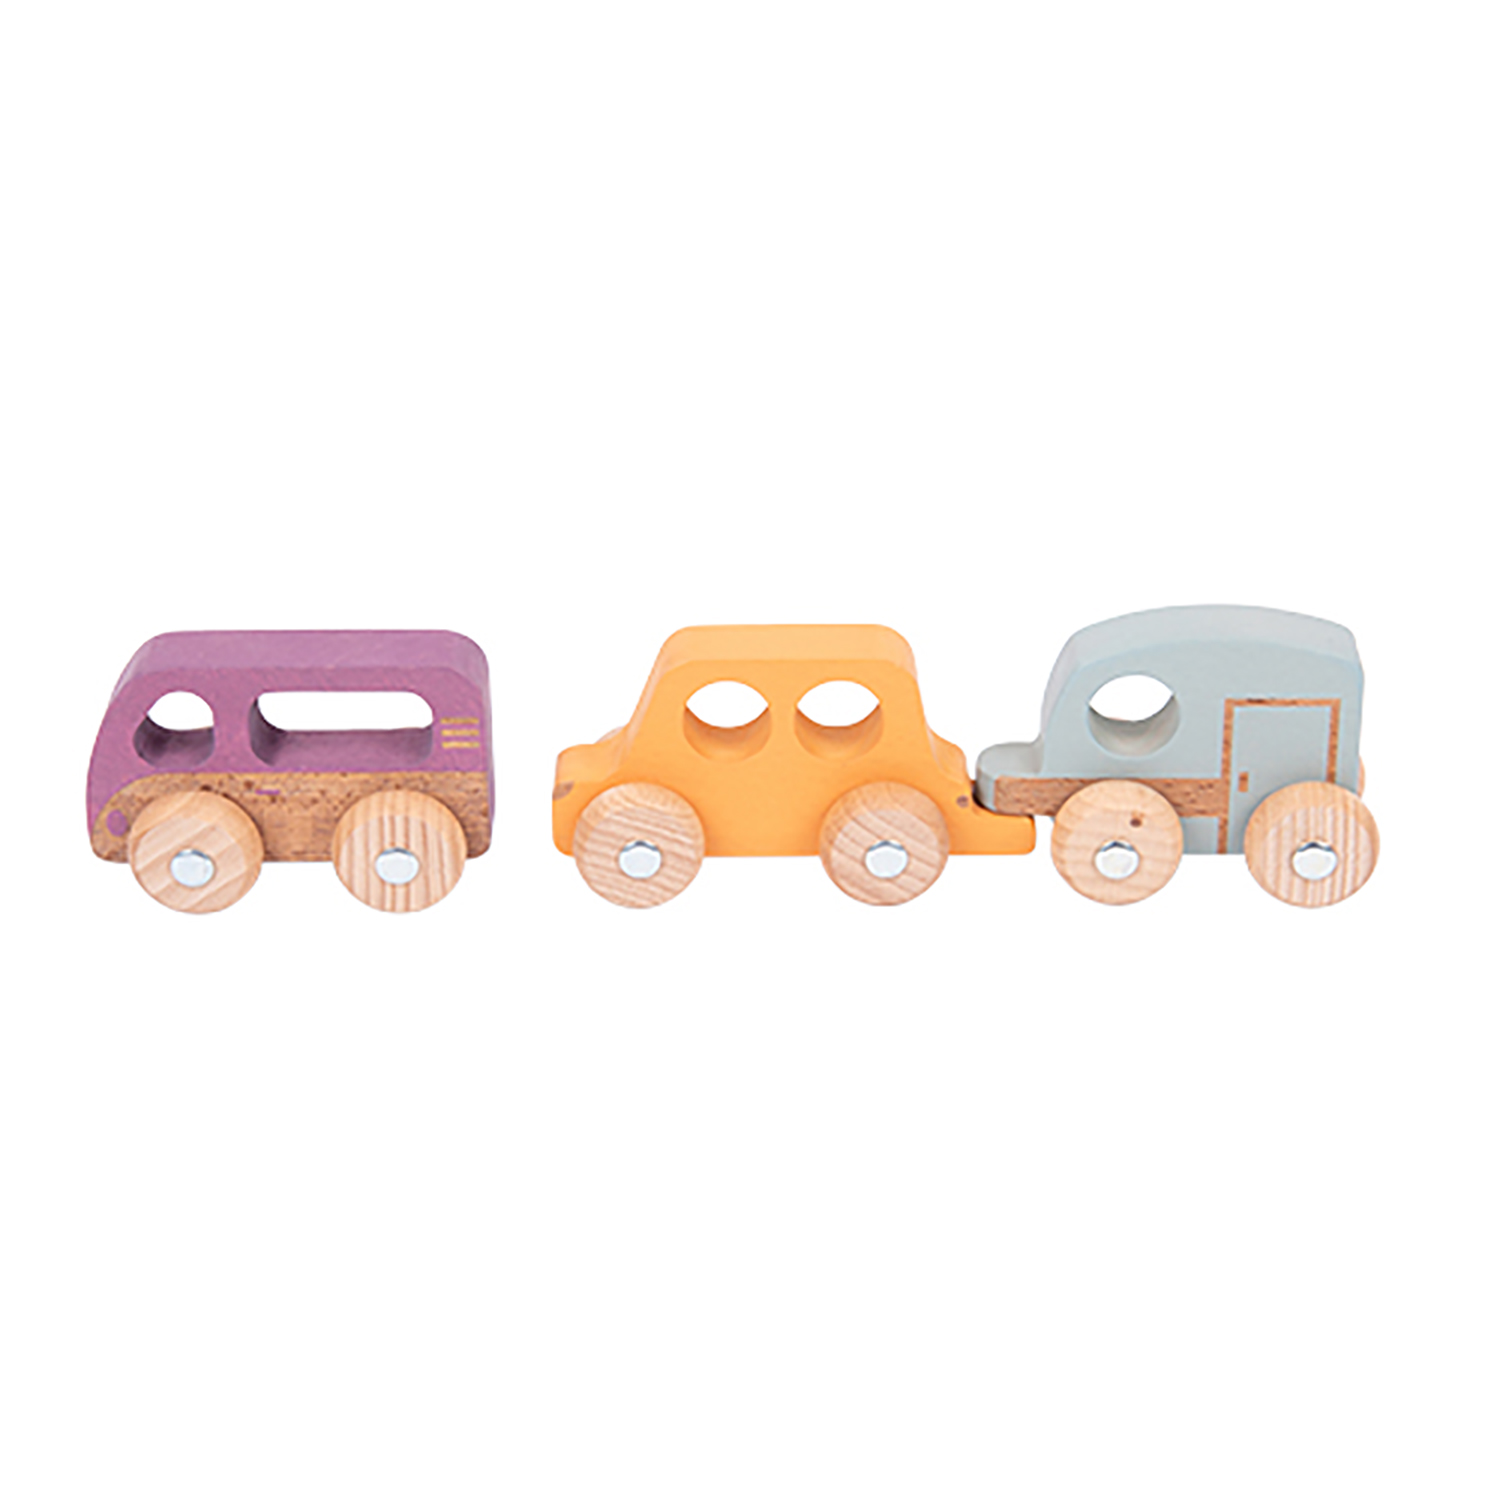 TickiT Rainbow Wooden Adventure Vehicles - Set of 3 image number null